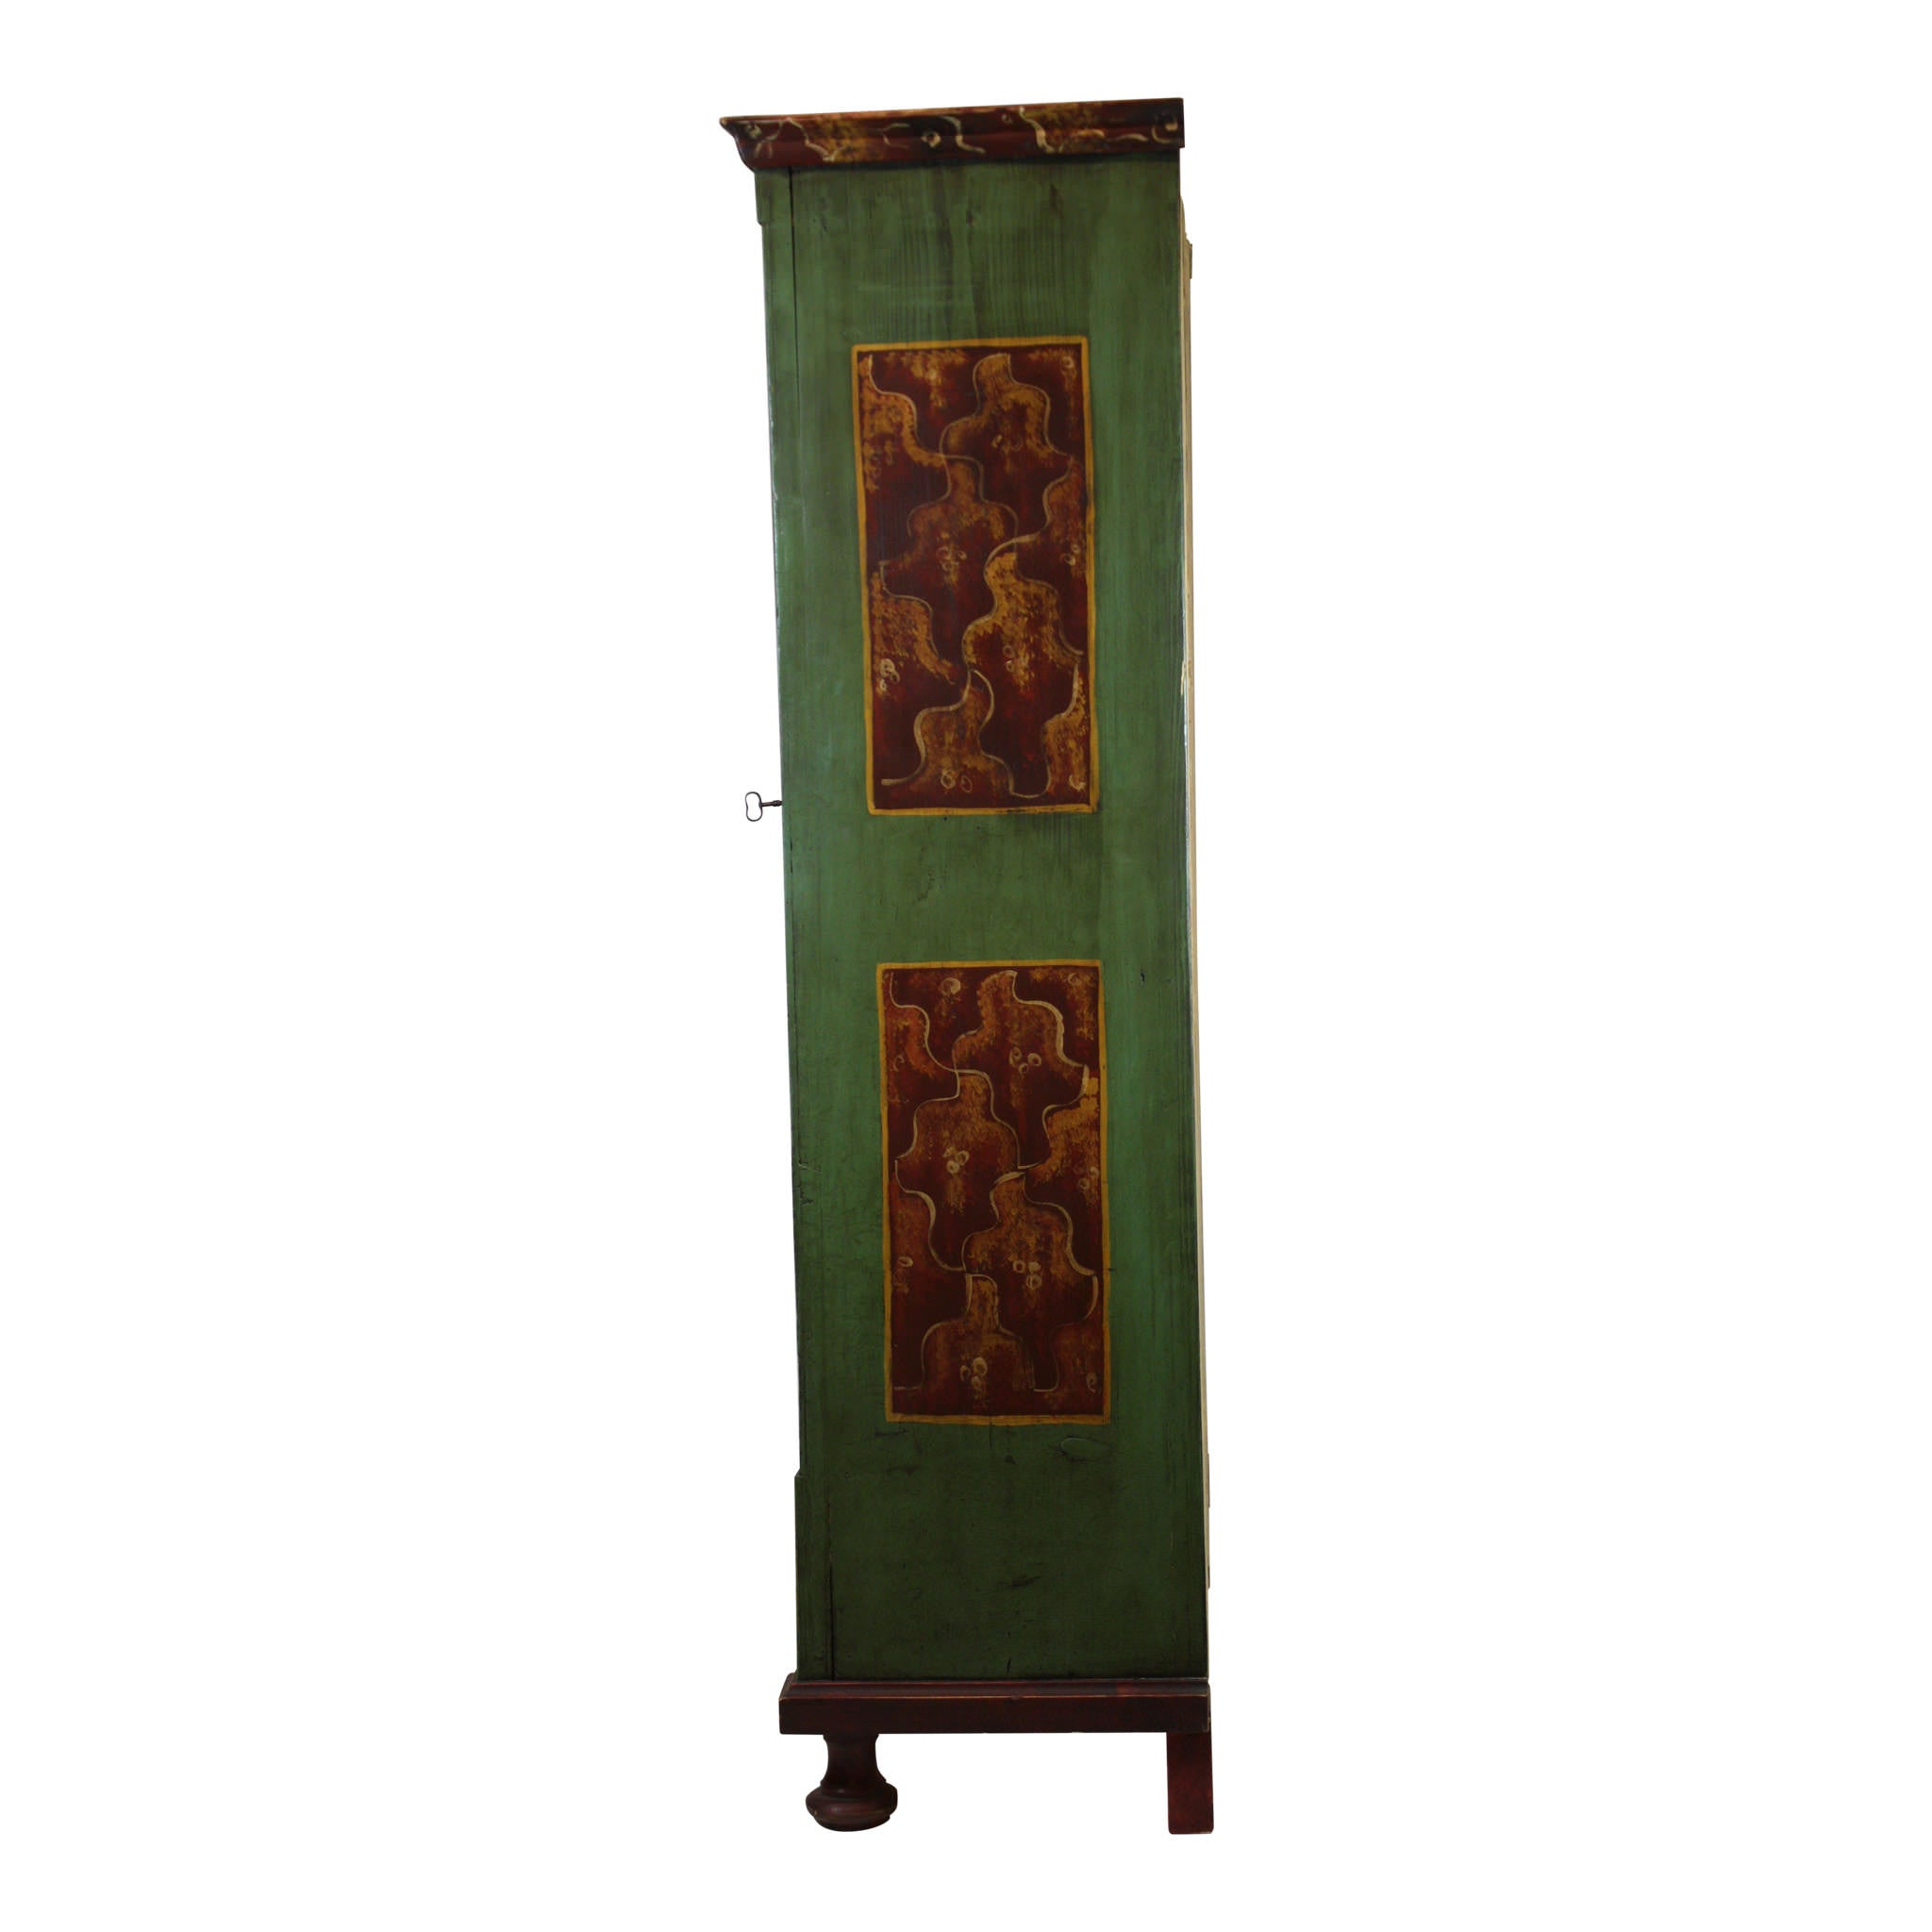 Painted Green Armoire